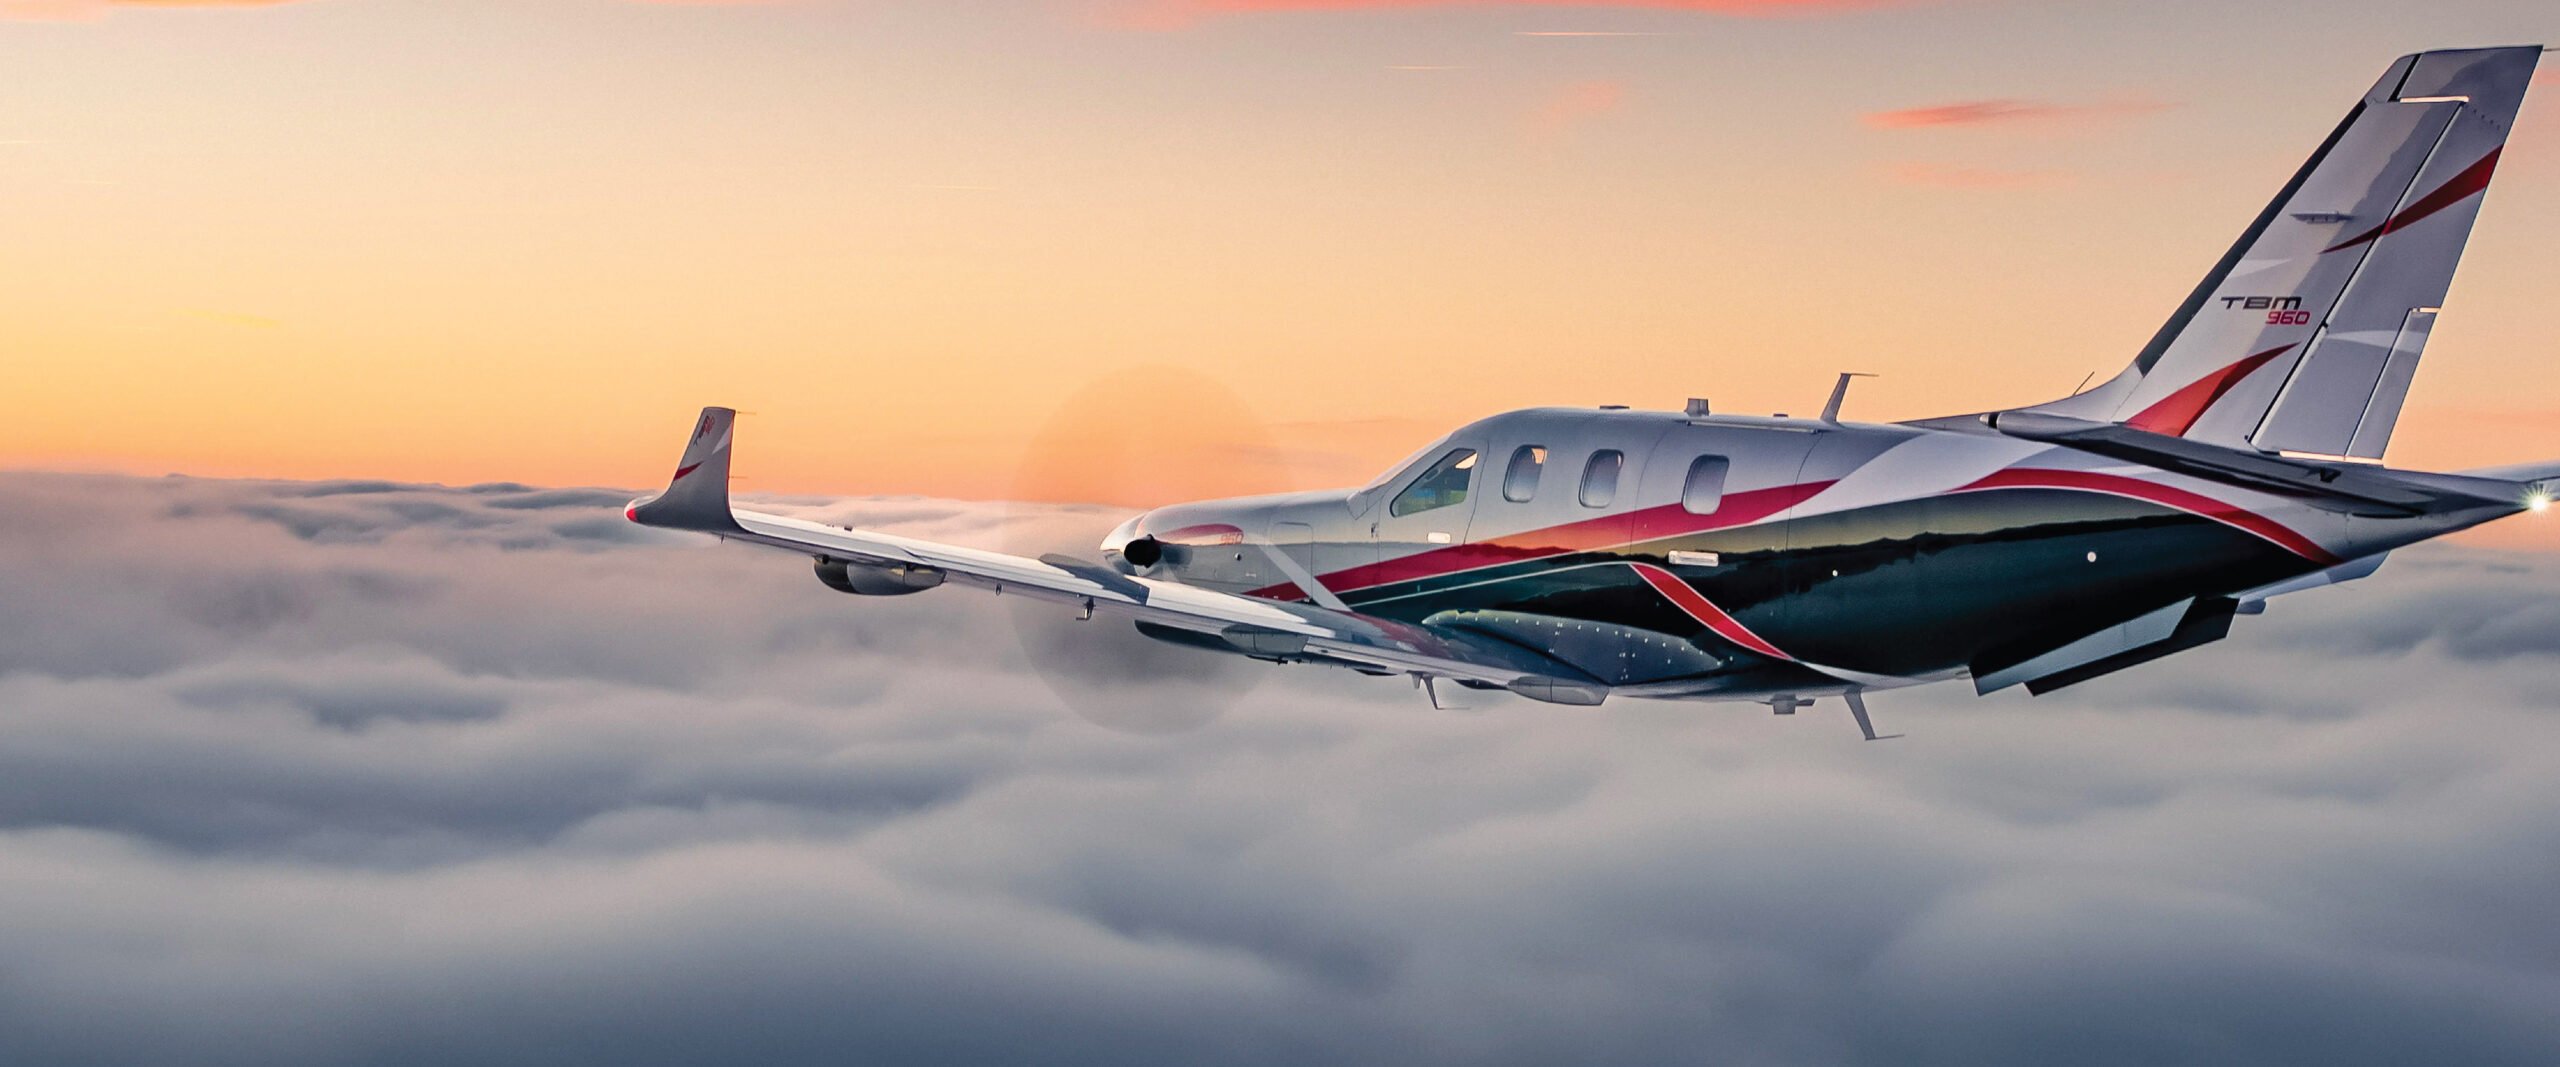 A stunning image of a TBM aircraft flying at sunset over picturesque European landscapes. Tailored for self-flying pilots